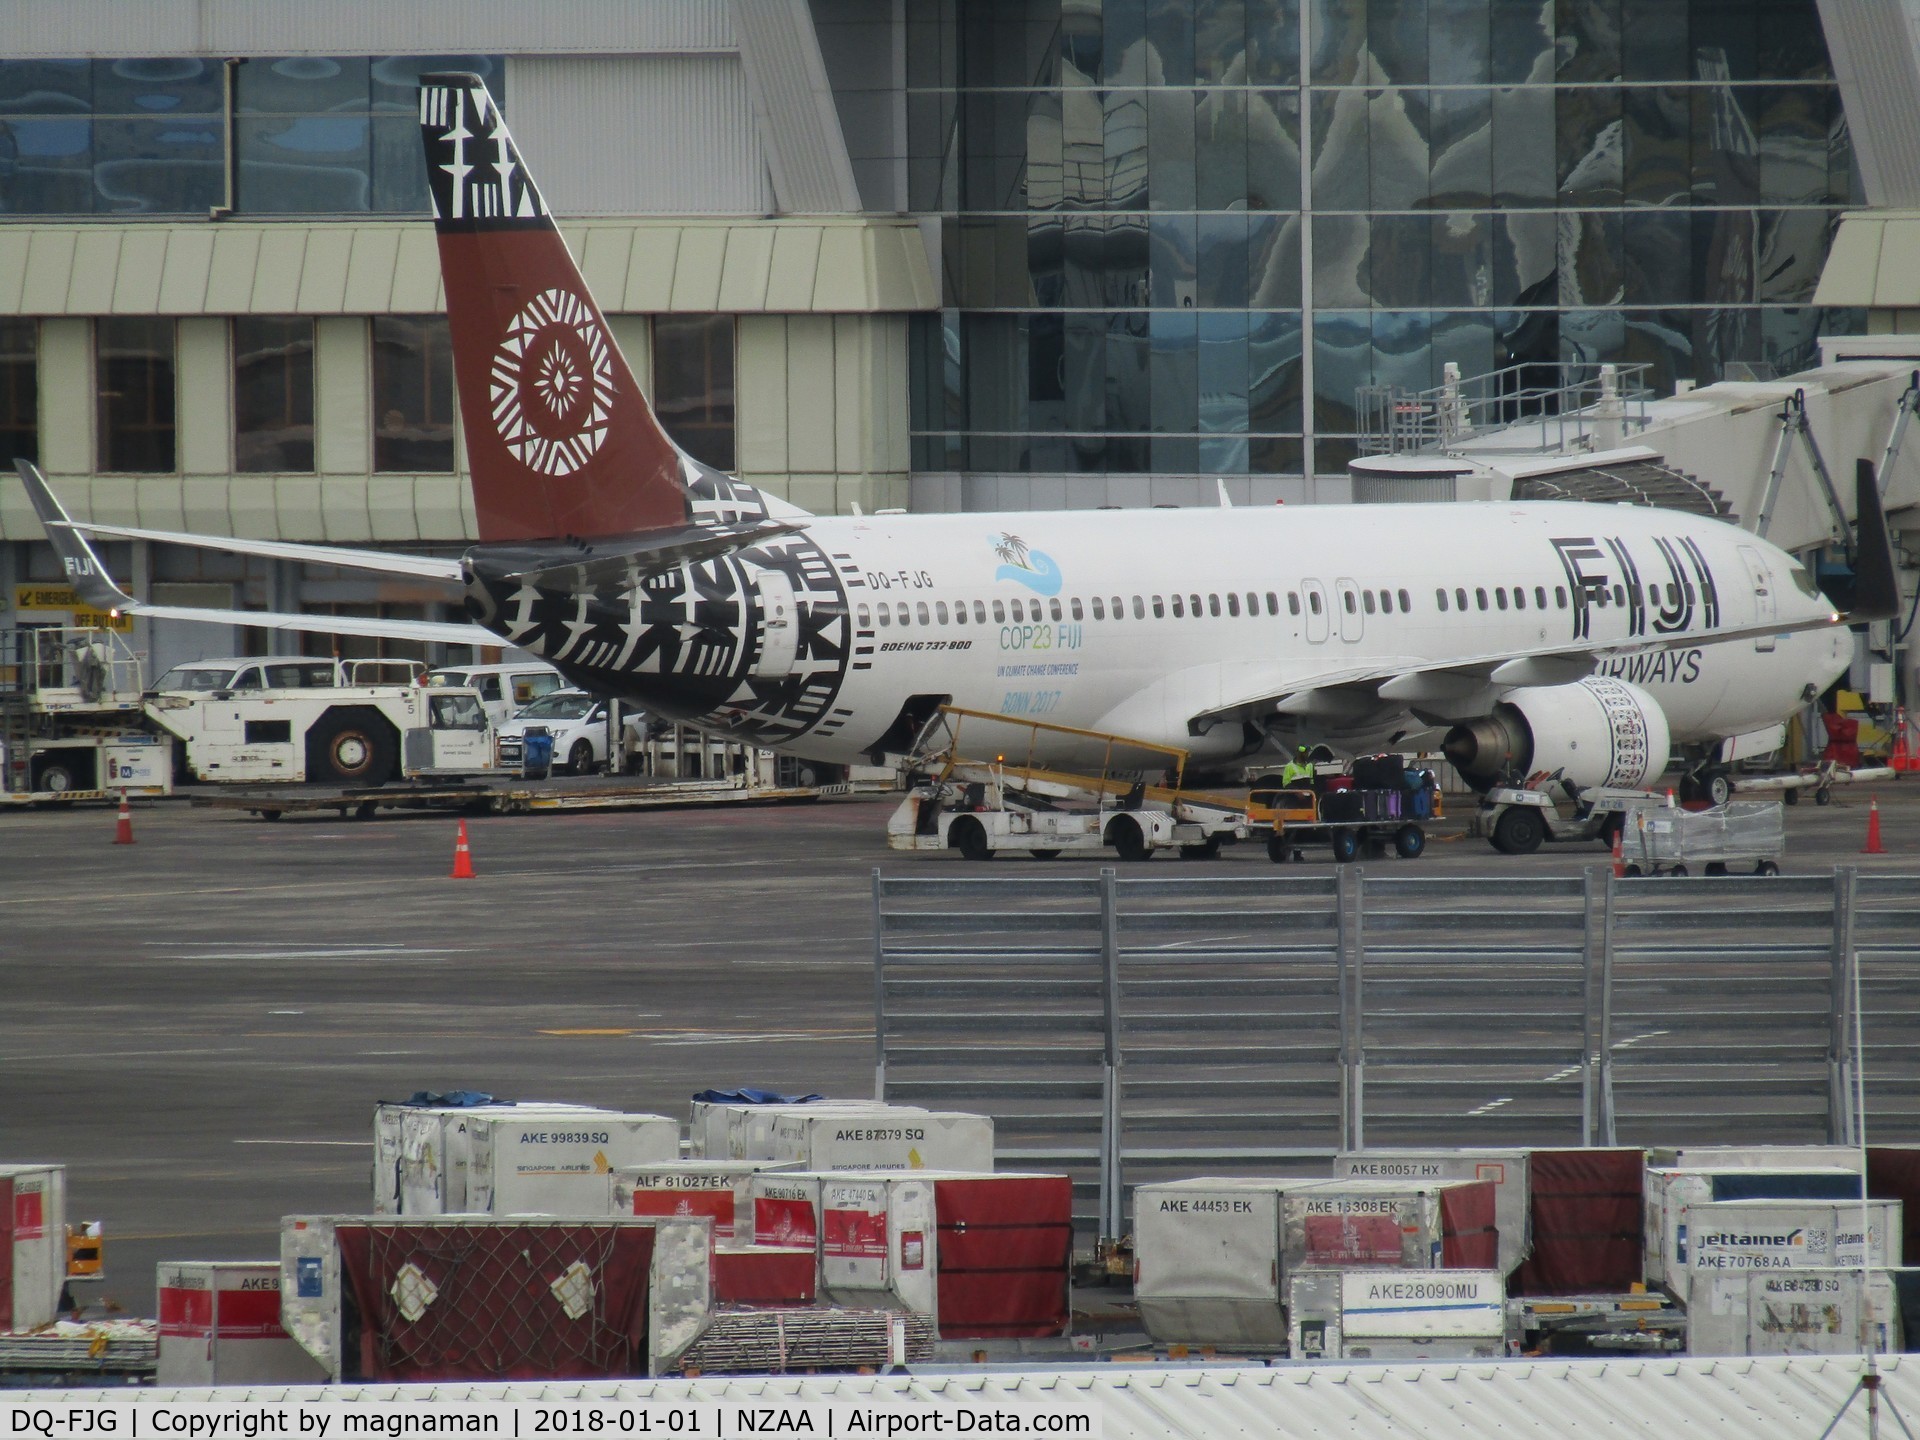 DQ-FJG, 1999 Boeing 737-8X2 C/N 29968, on stand at AKL